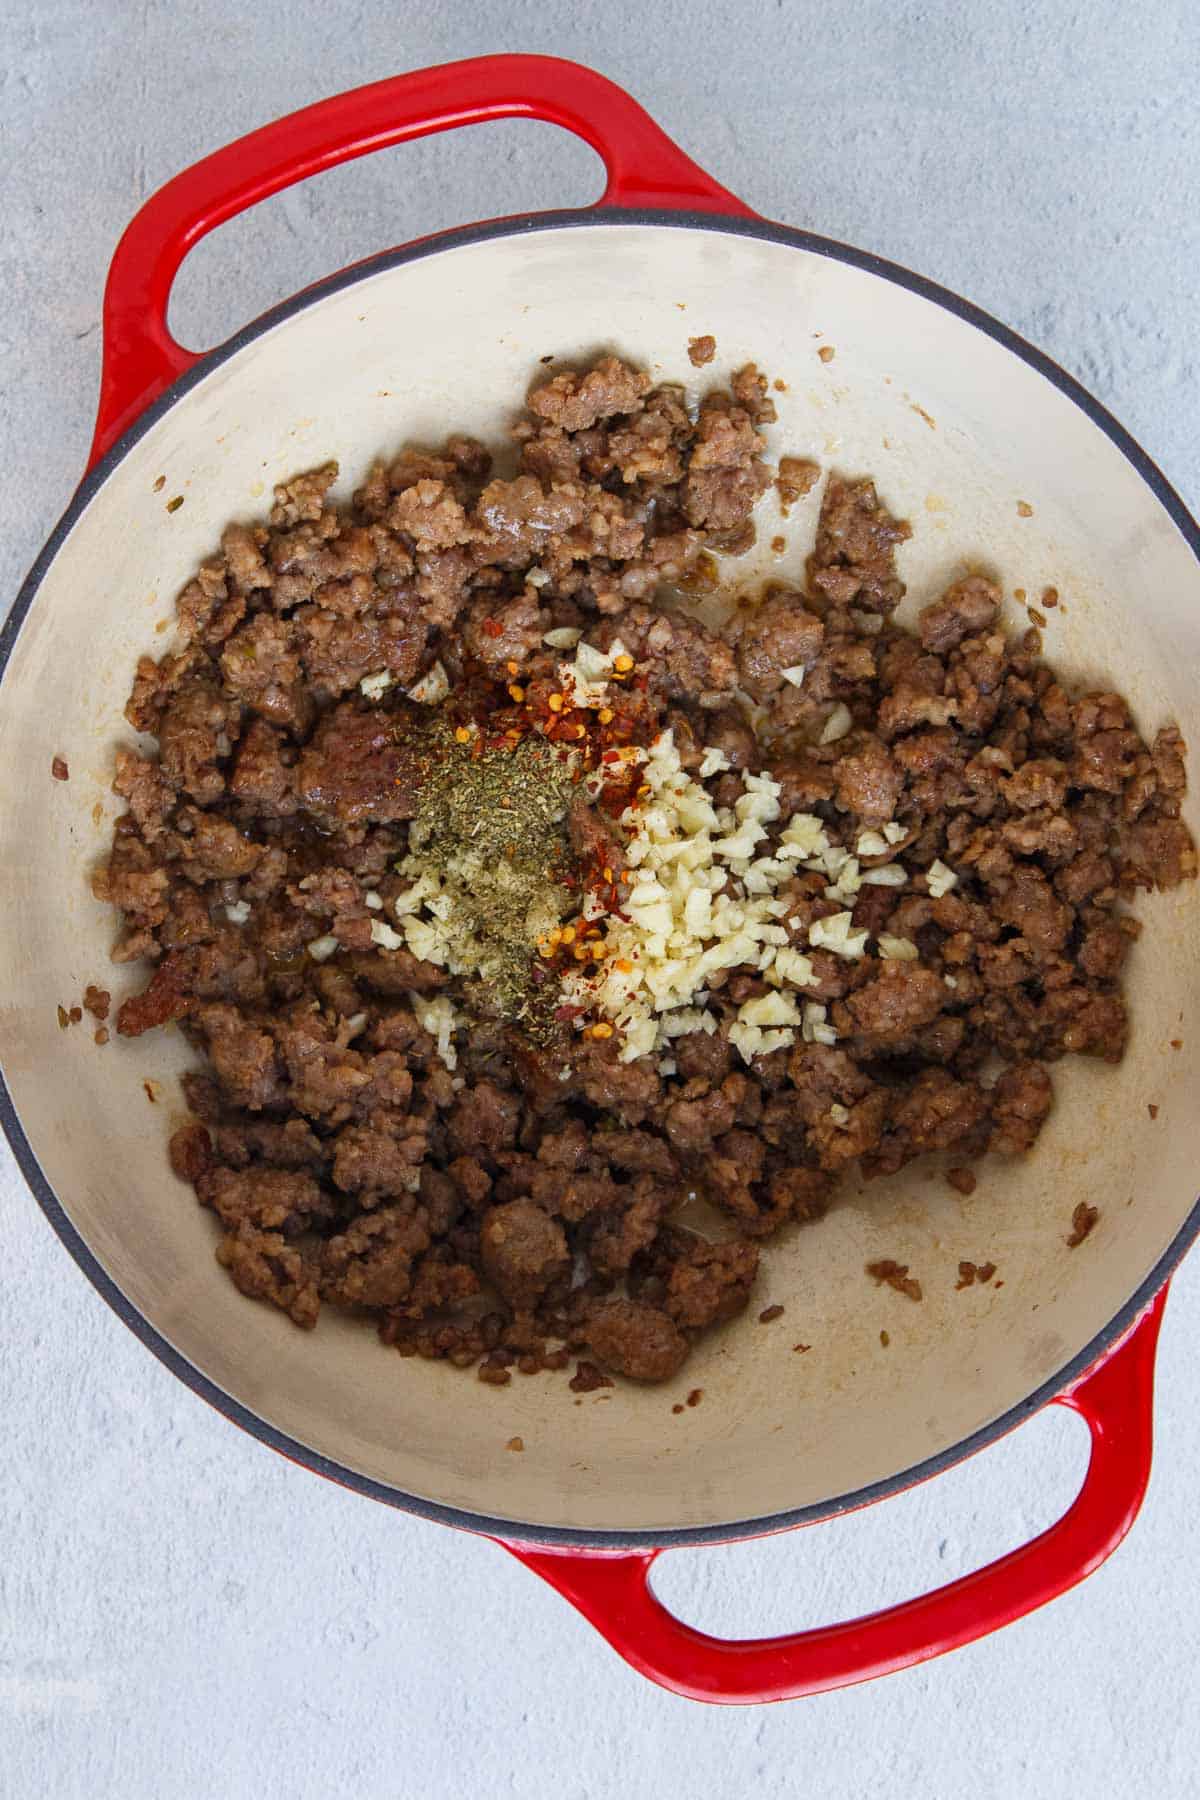 Garlic, Italian seasoning, and red pepper flakes added to cooked Italian sausage in a large pot